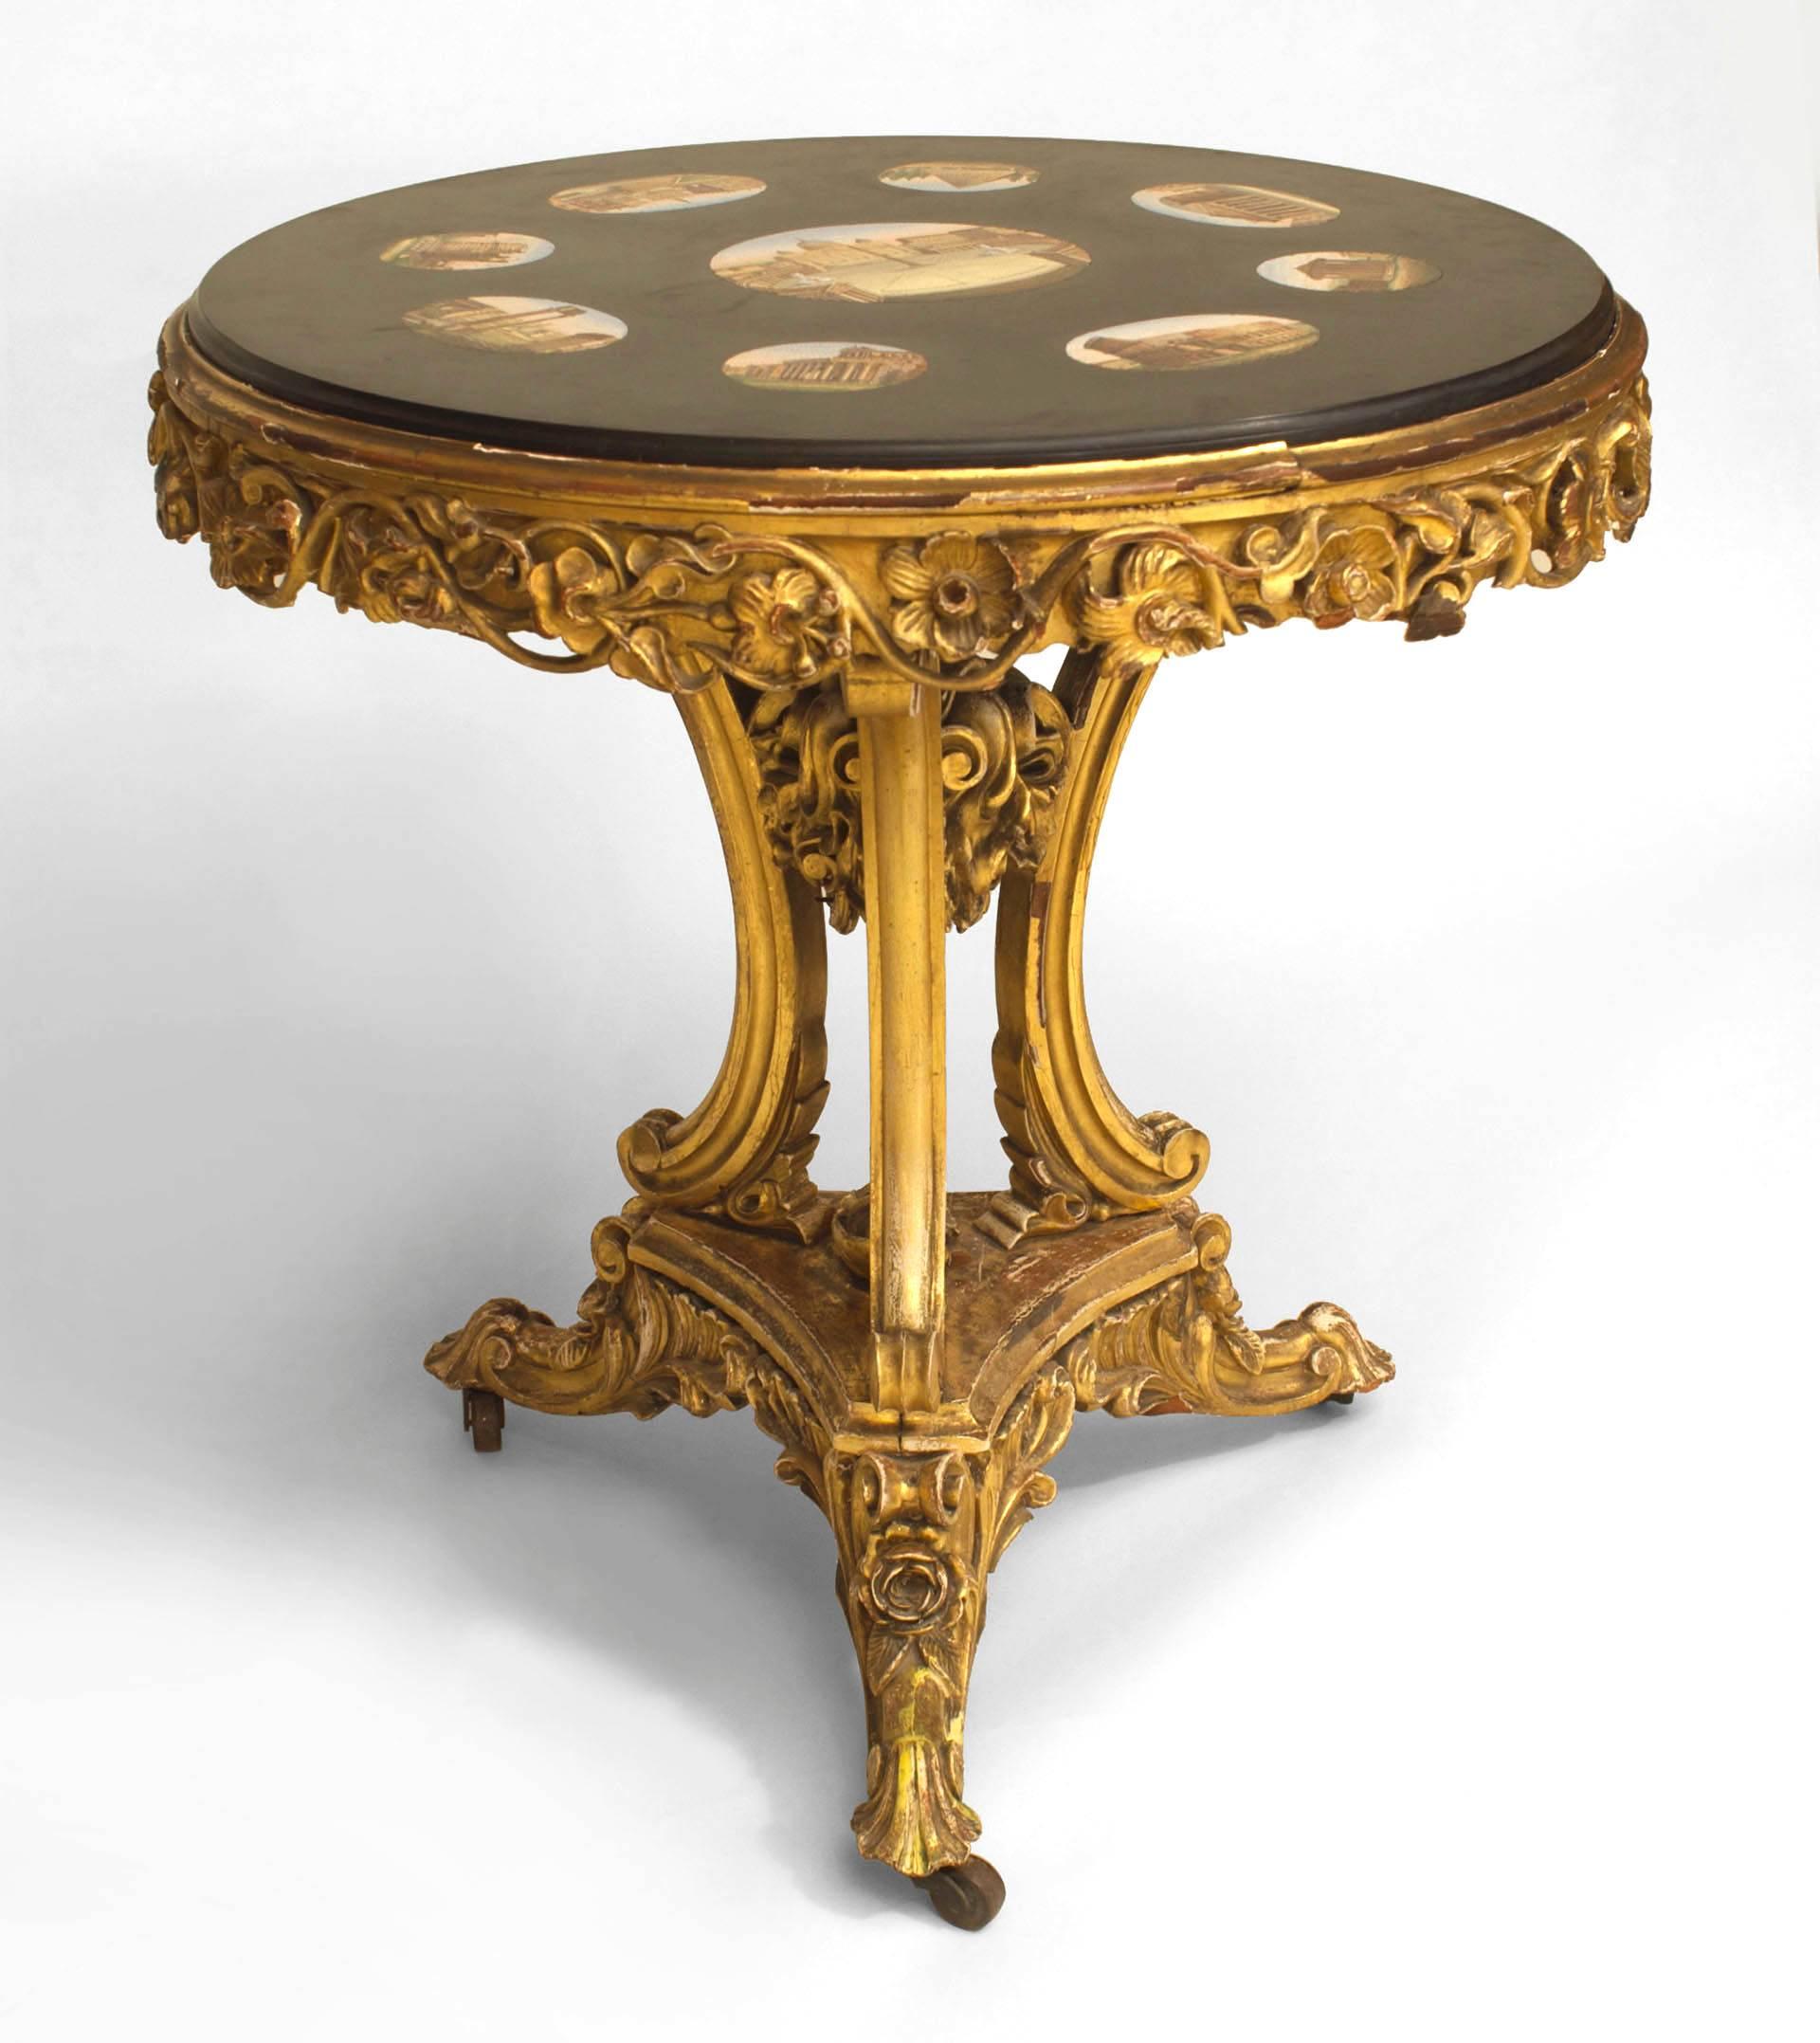 Italian Neoclassic (19th Century) gilt wood carved floral base end table with a round inset black marble top having pietra durra inlaid scenes of classical Roman building.
